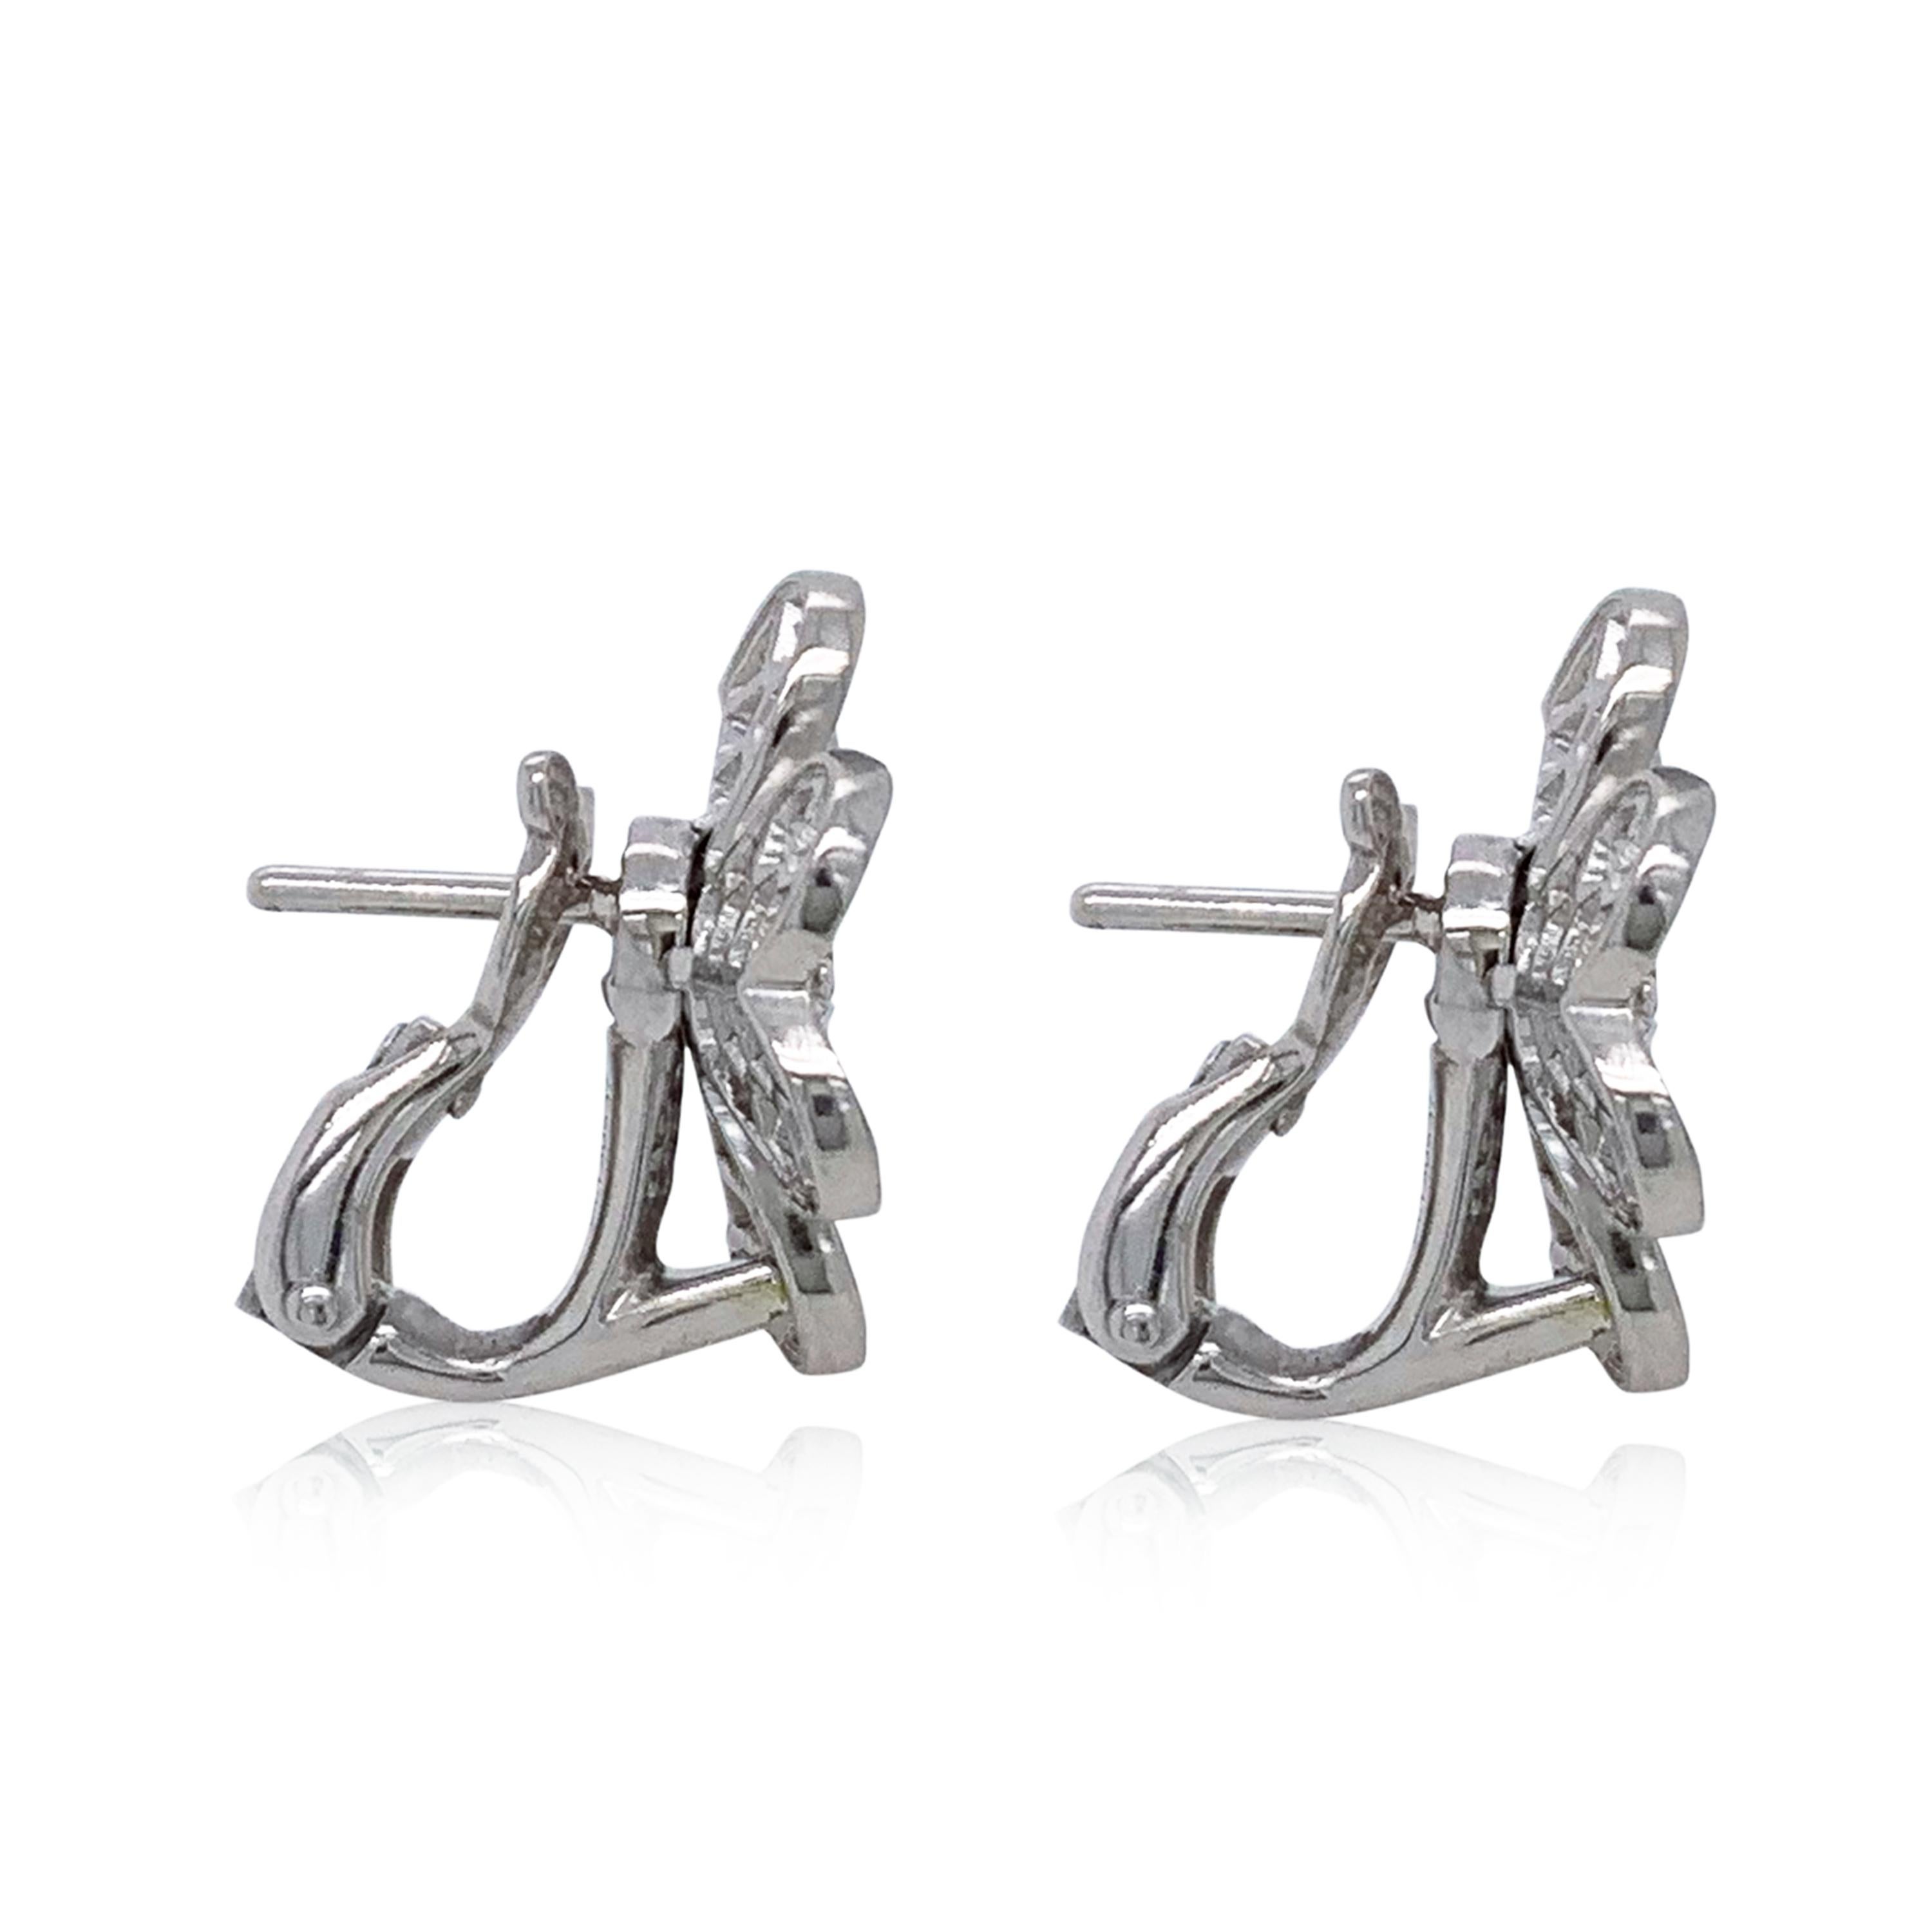 Van Cleef & Arpels Frivole diamond flower earrings in 18k white gold, small model.

These earrings feature 86 round brilliant cut diamonds totaling approximately 1.61 carats with D-E-F color and VVS+ clarity.  The stems are detachable so the